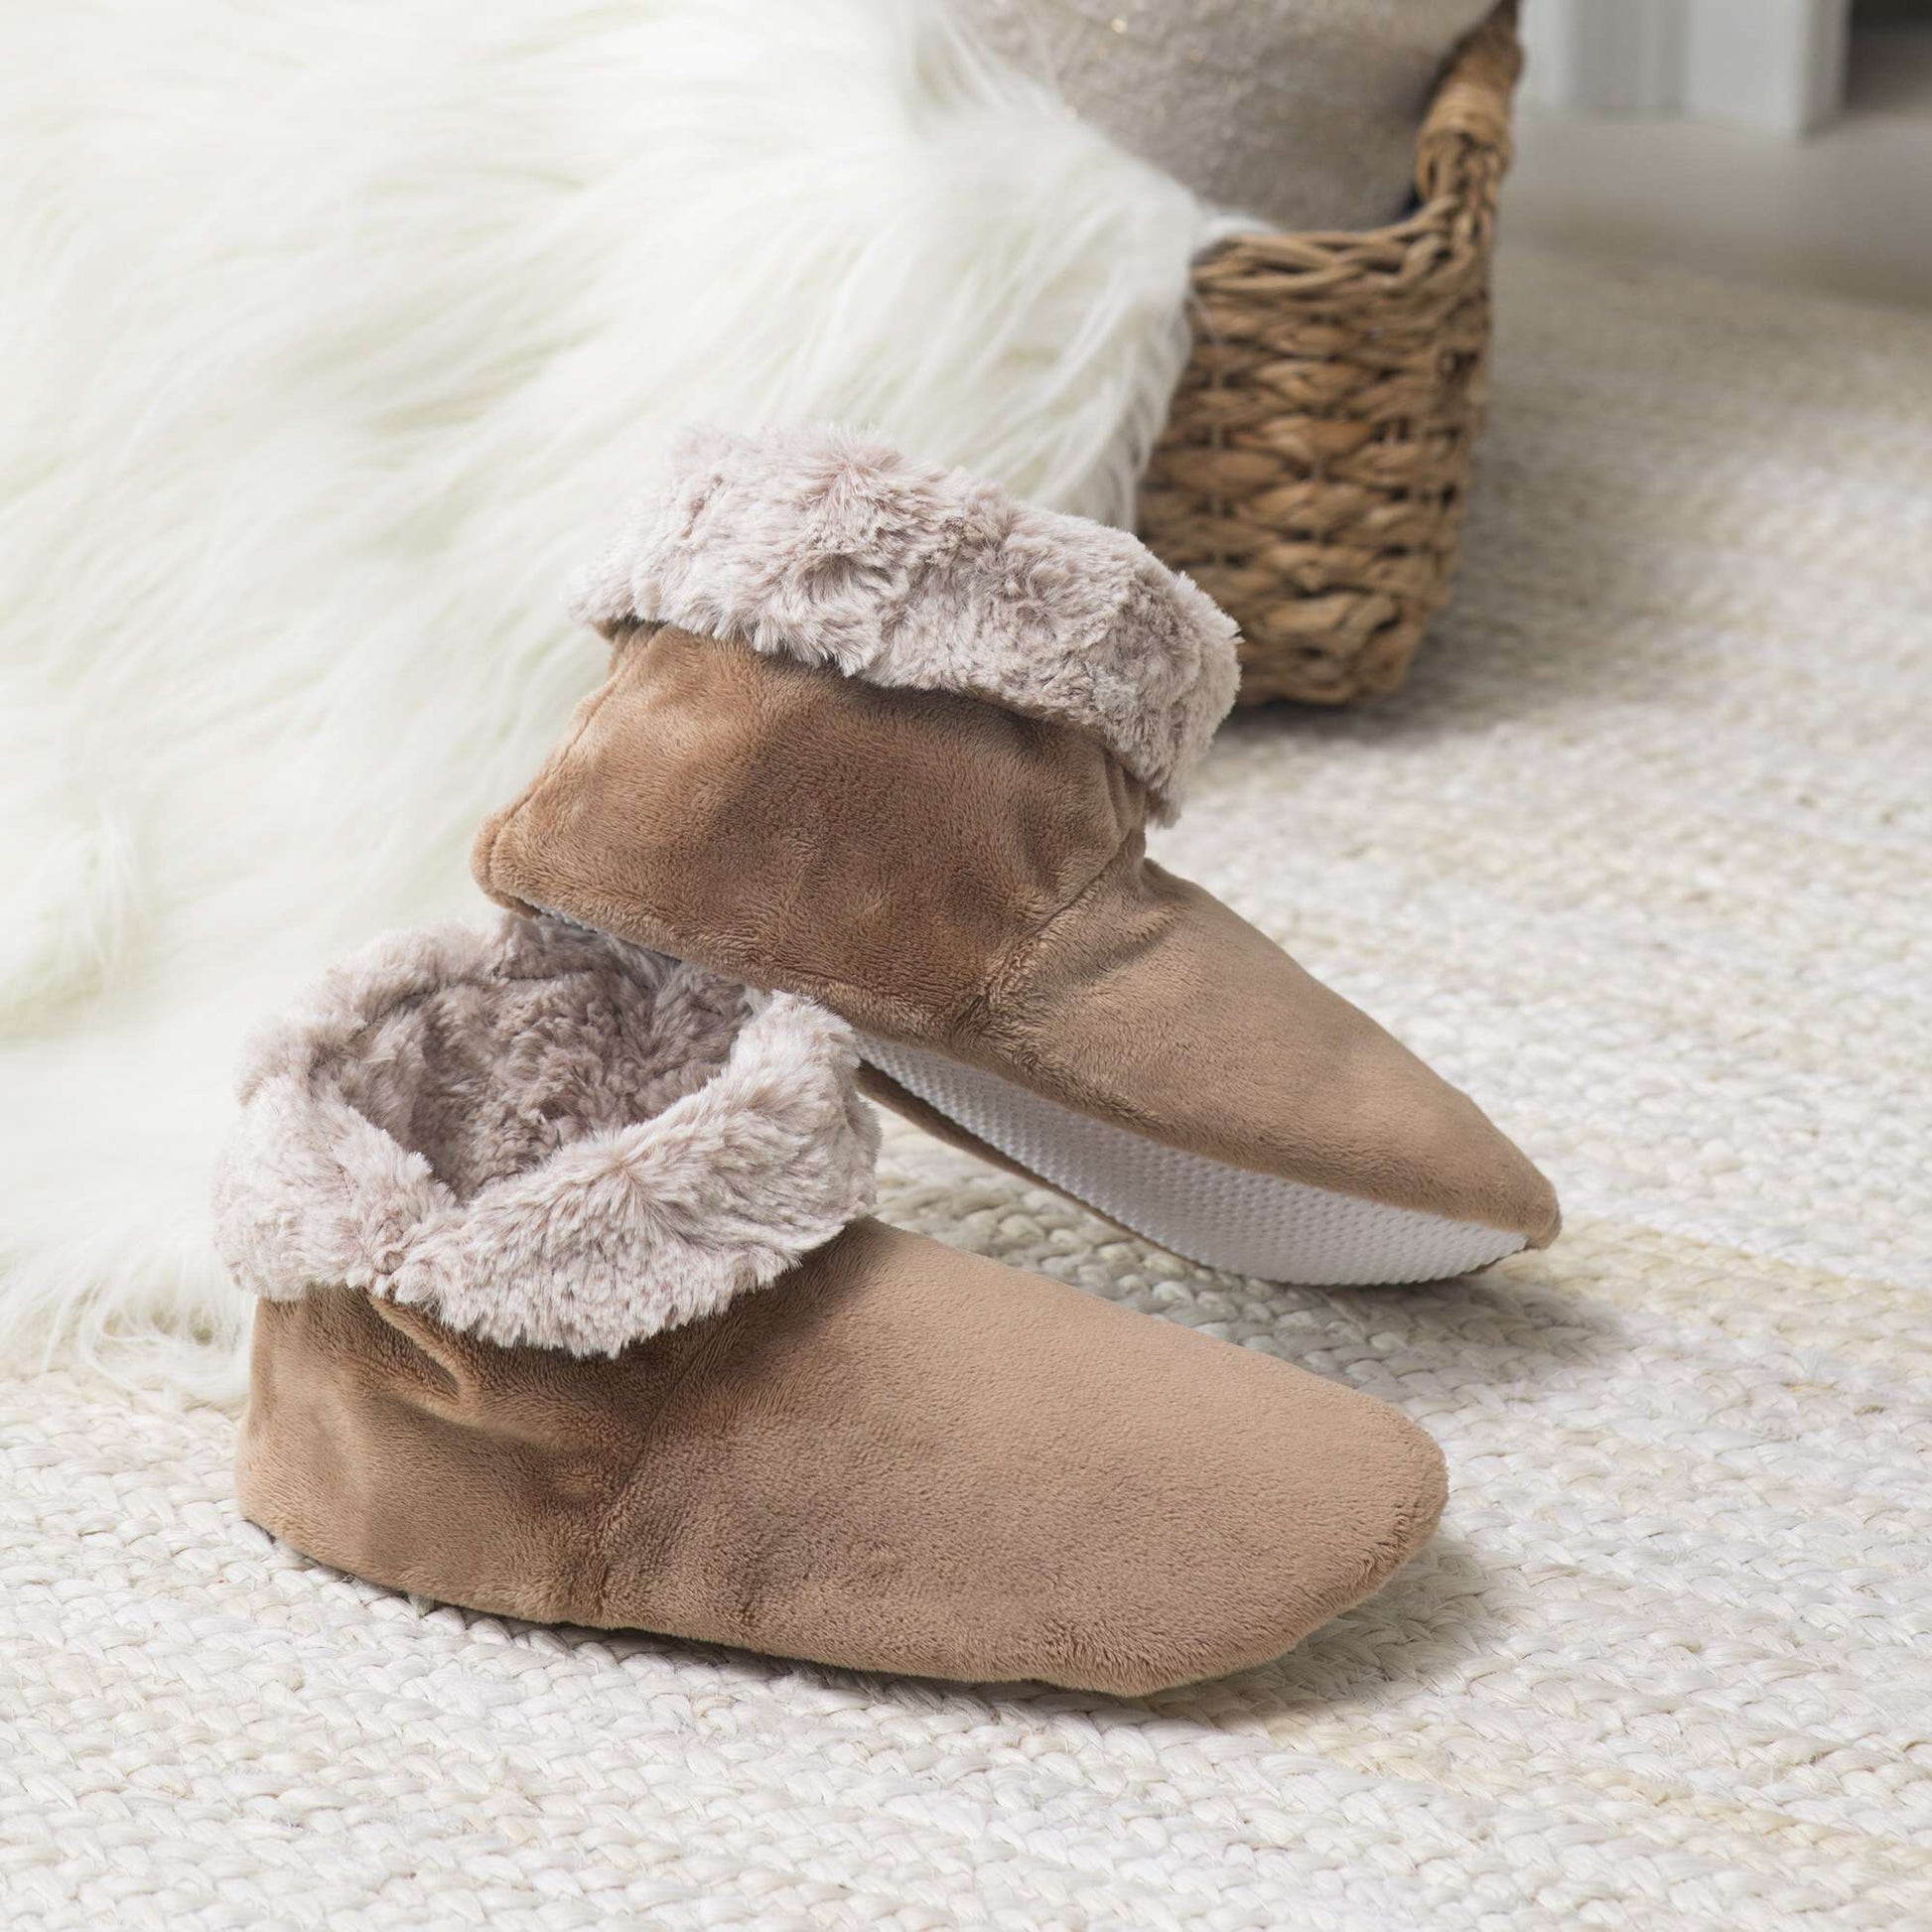 Free Coats & Clark Sew Cozy Boot Slippers Using Faux Fur Sewing Pattern